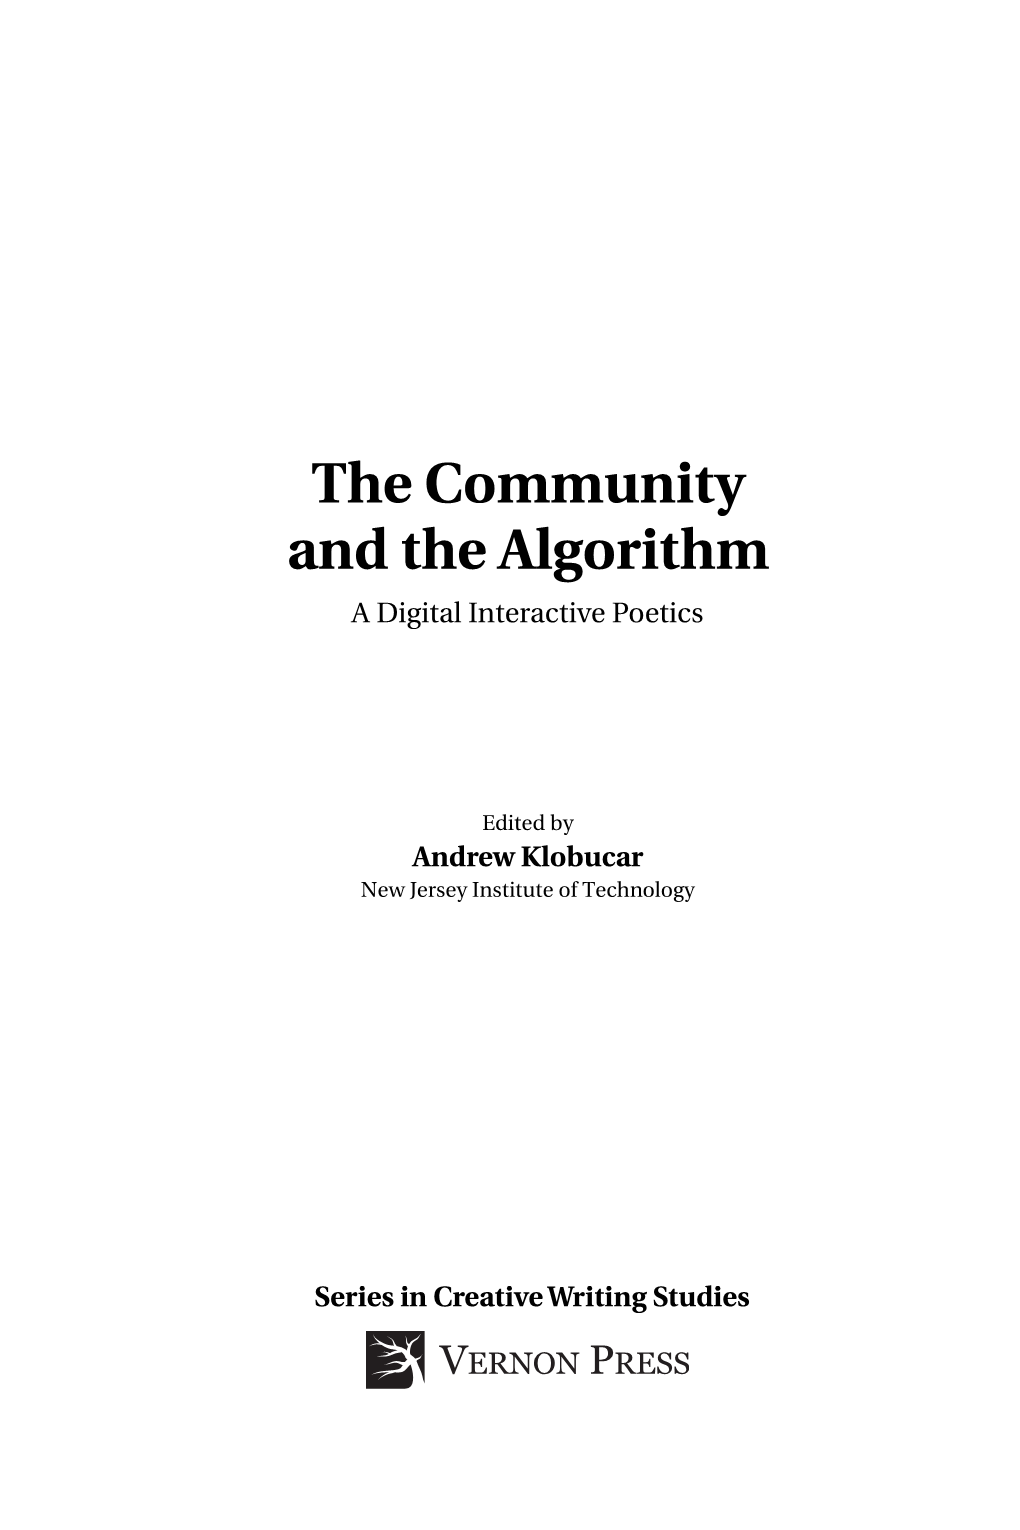 The Community and the Algorithm a Digital Interactive Poetics